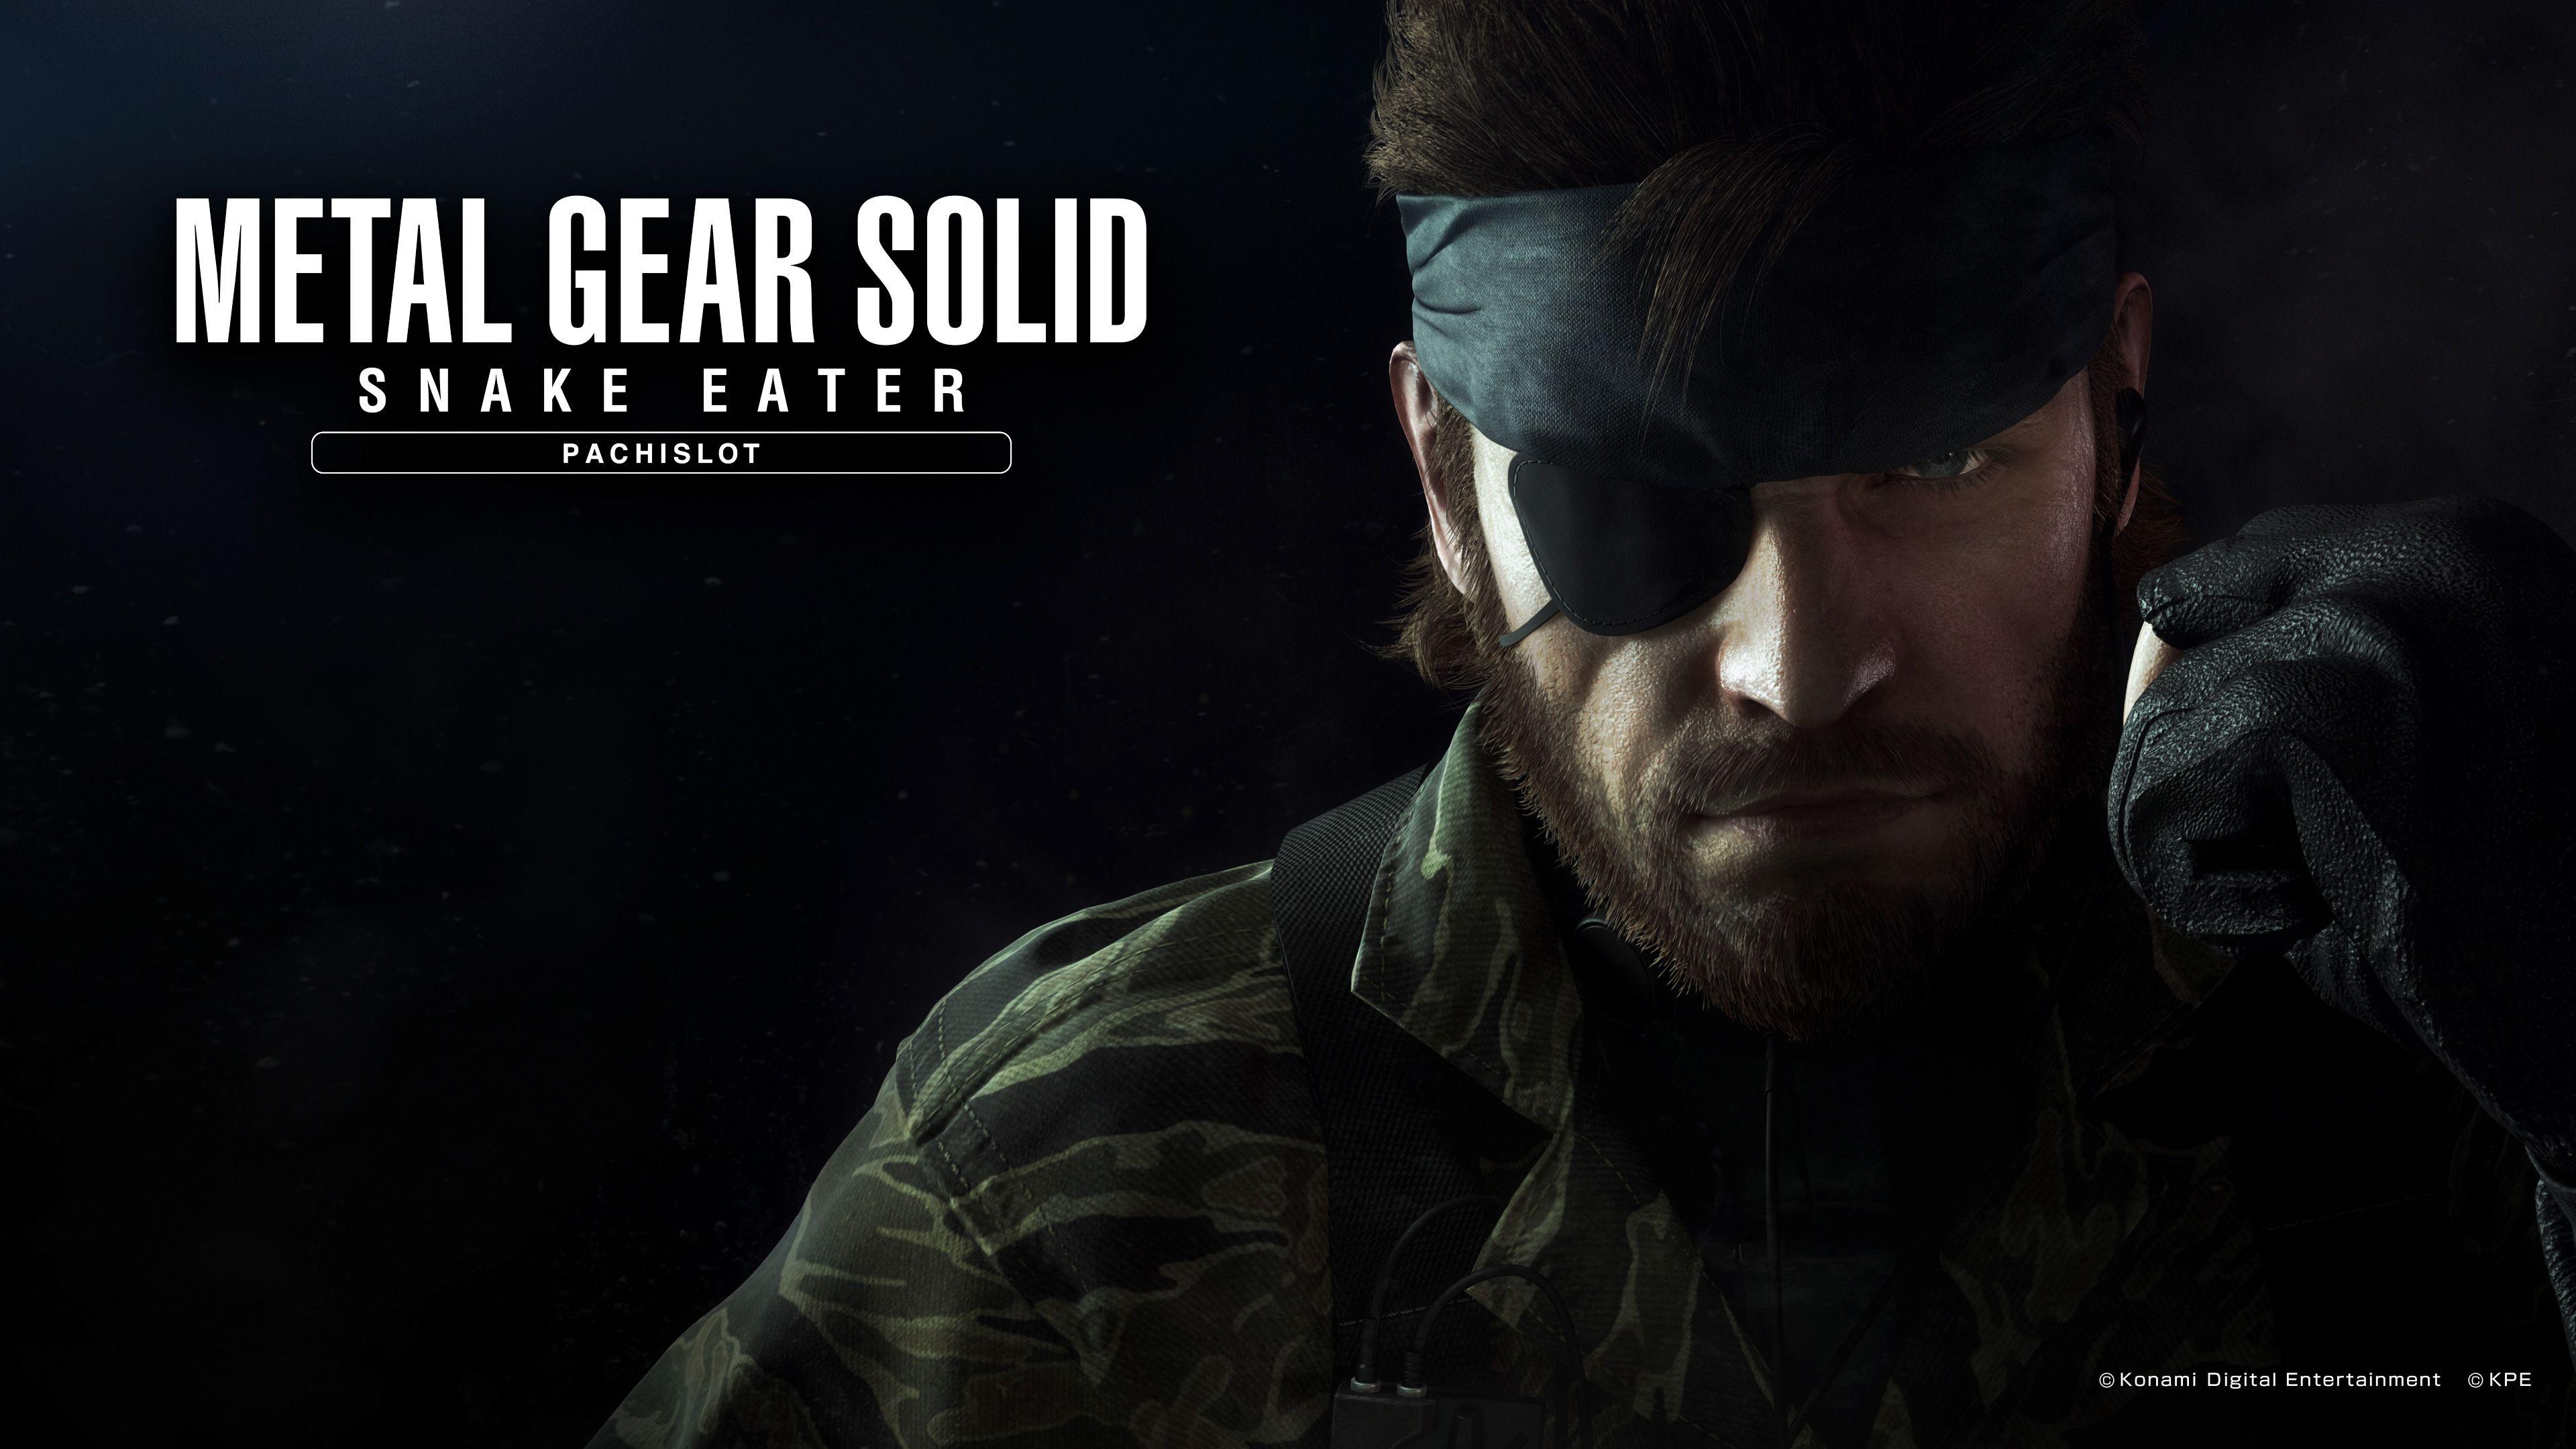 Official Metal Gear Solid Snake Eater Pachislot wallpaper released